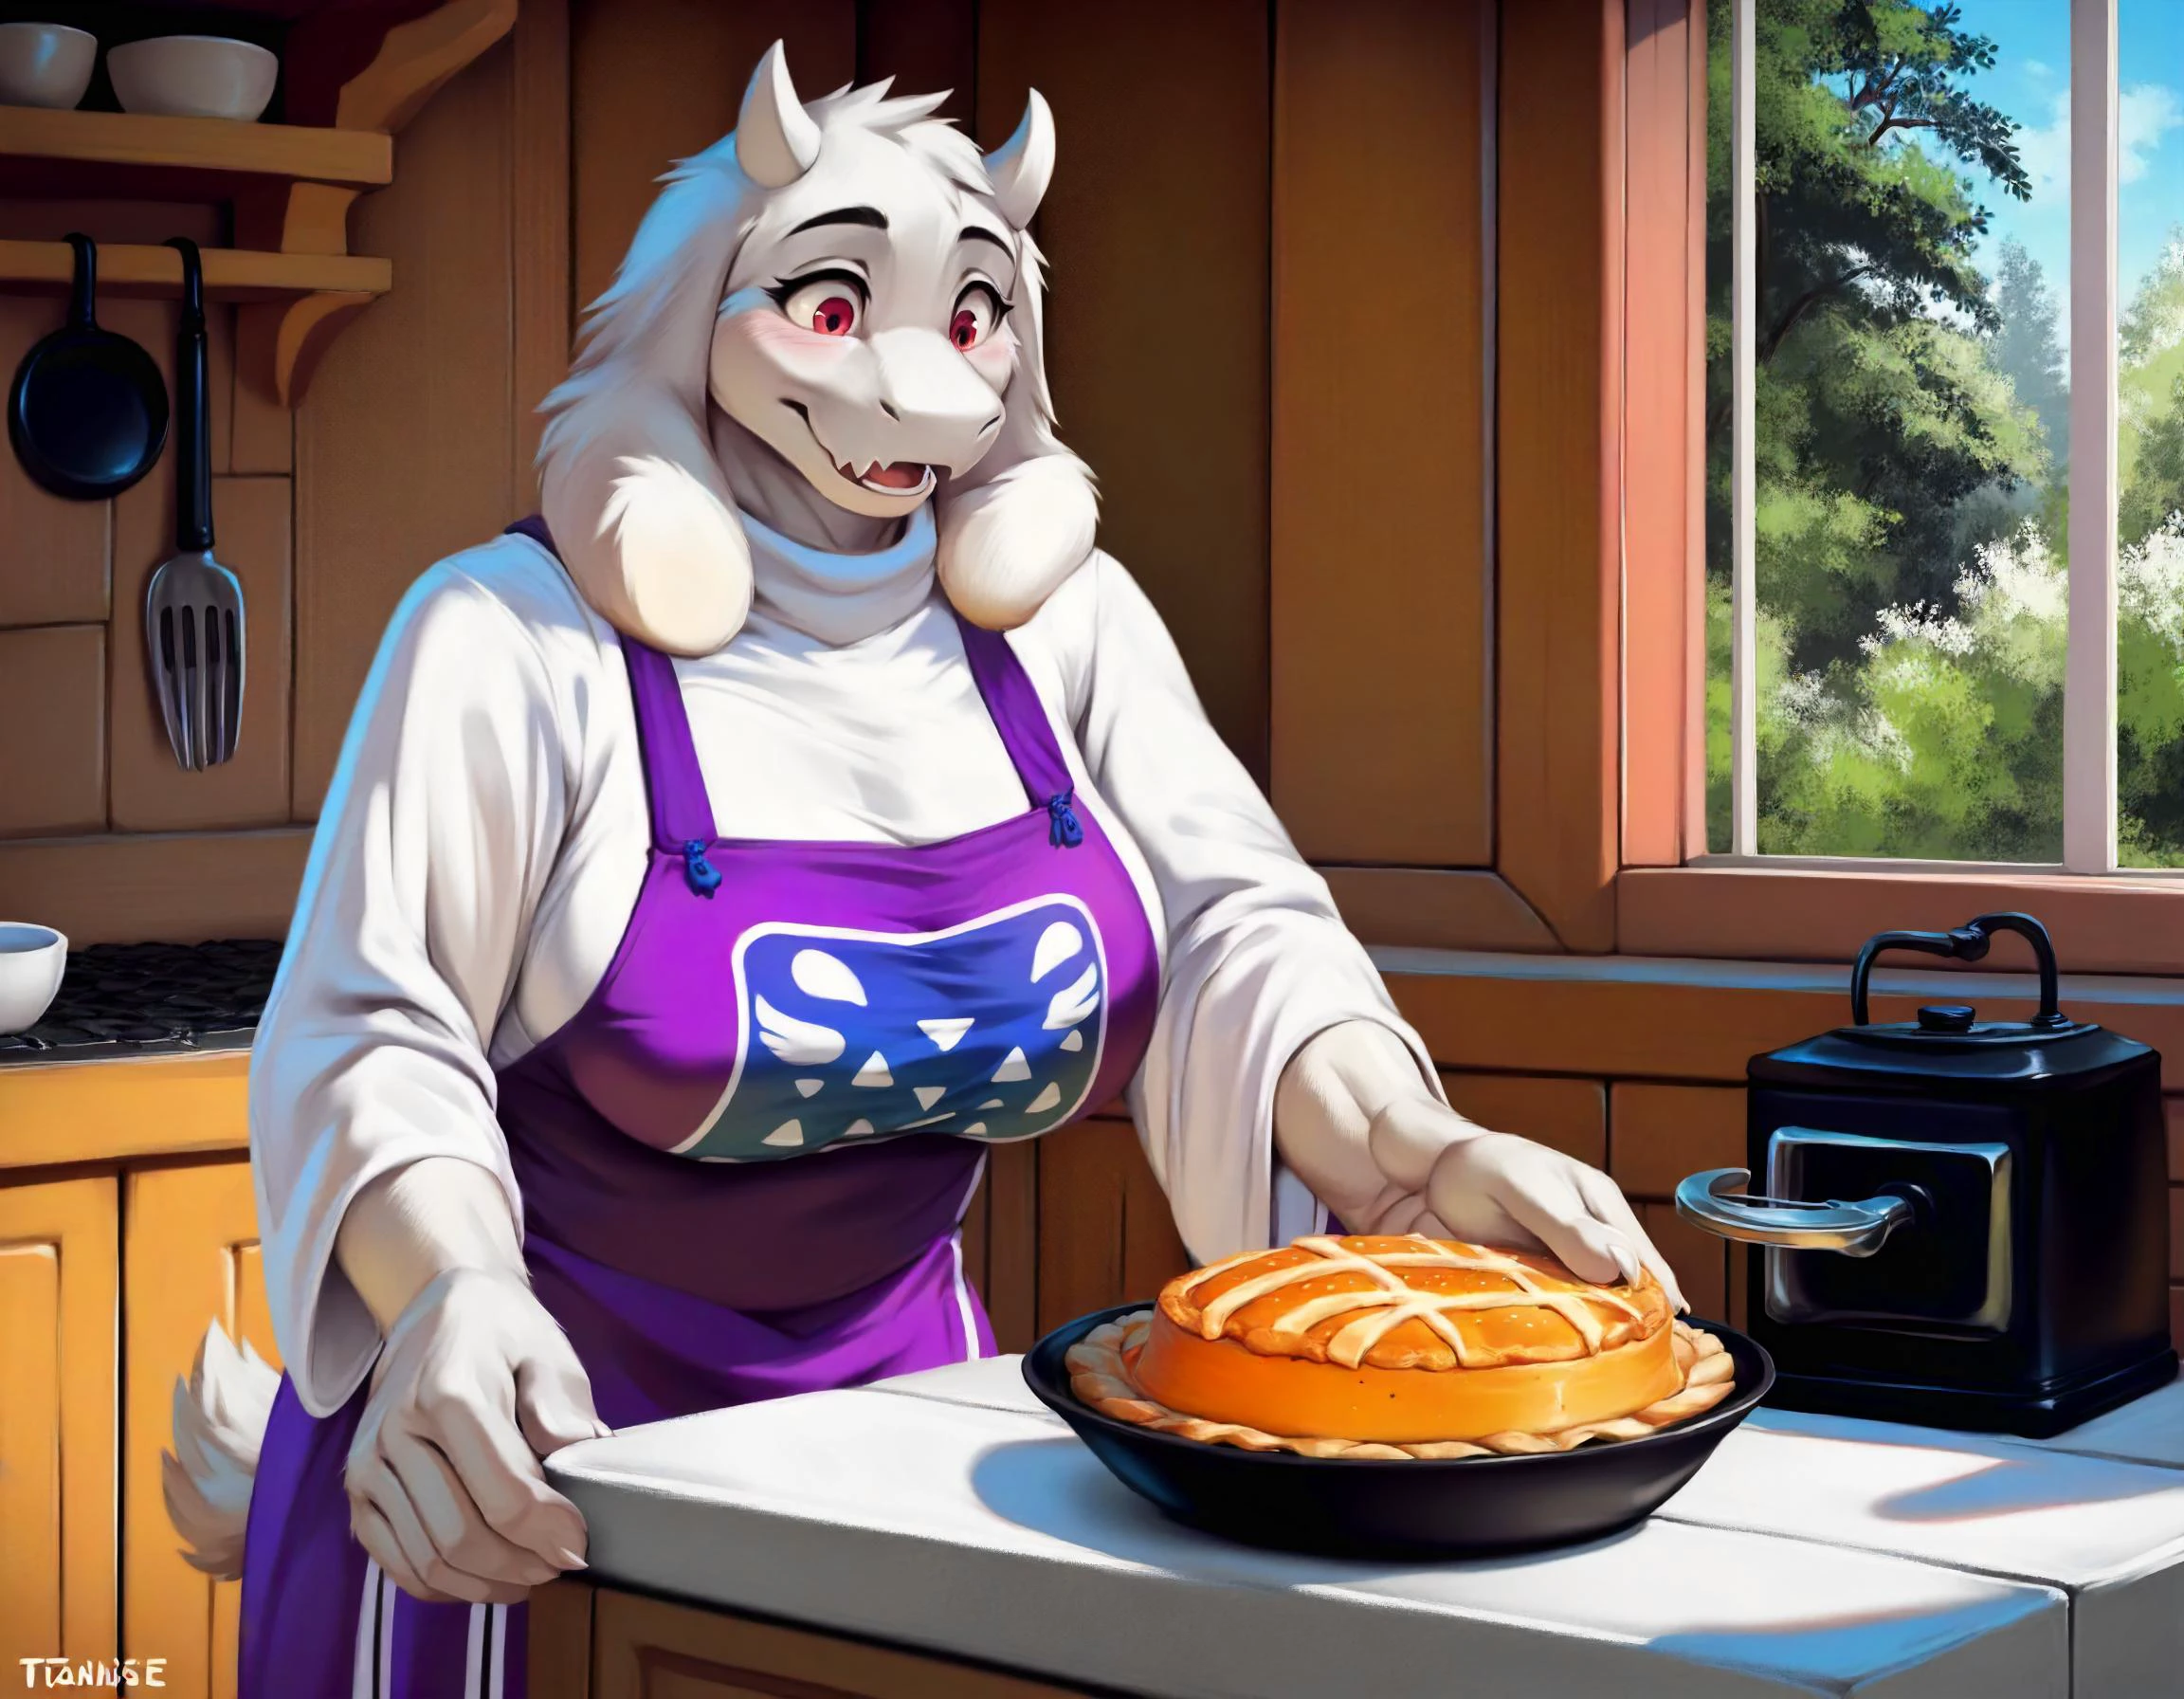 score_9, score_9_up, score_8_up, score_7_up, score_6_up, score_5_up, rating_safe, source_furry, anthro, toriel, solo, baking a pie in a stove, digital art anthro, tail, fully in view, detailed fluffy fur covered body, duo, in a cottage home indoors,
